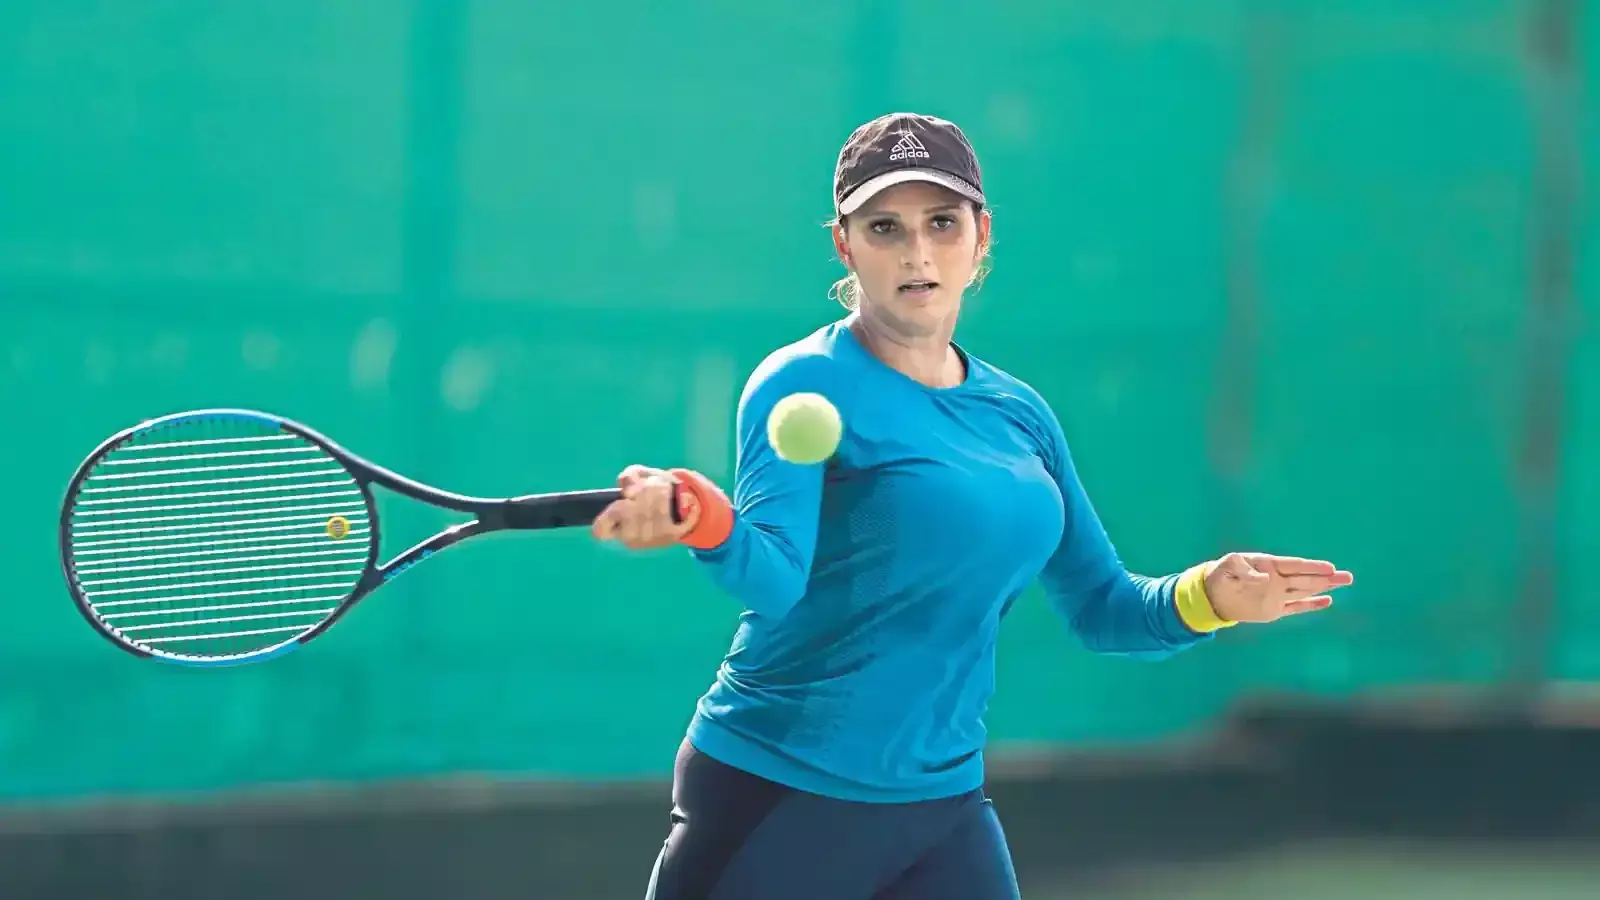 Sania Mirza will be appearing in her fourth Olympics in Tokyo [Source: Livemint]